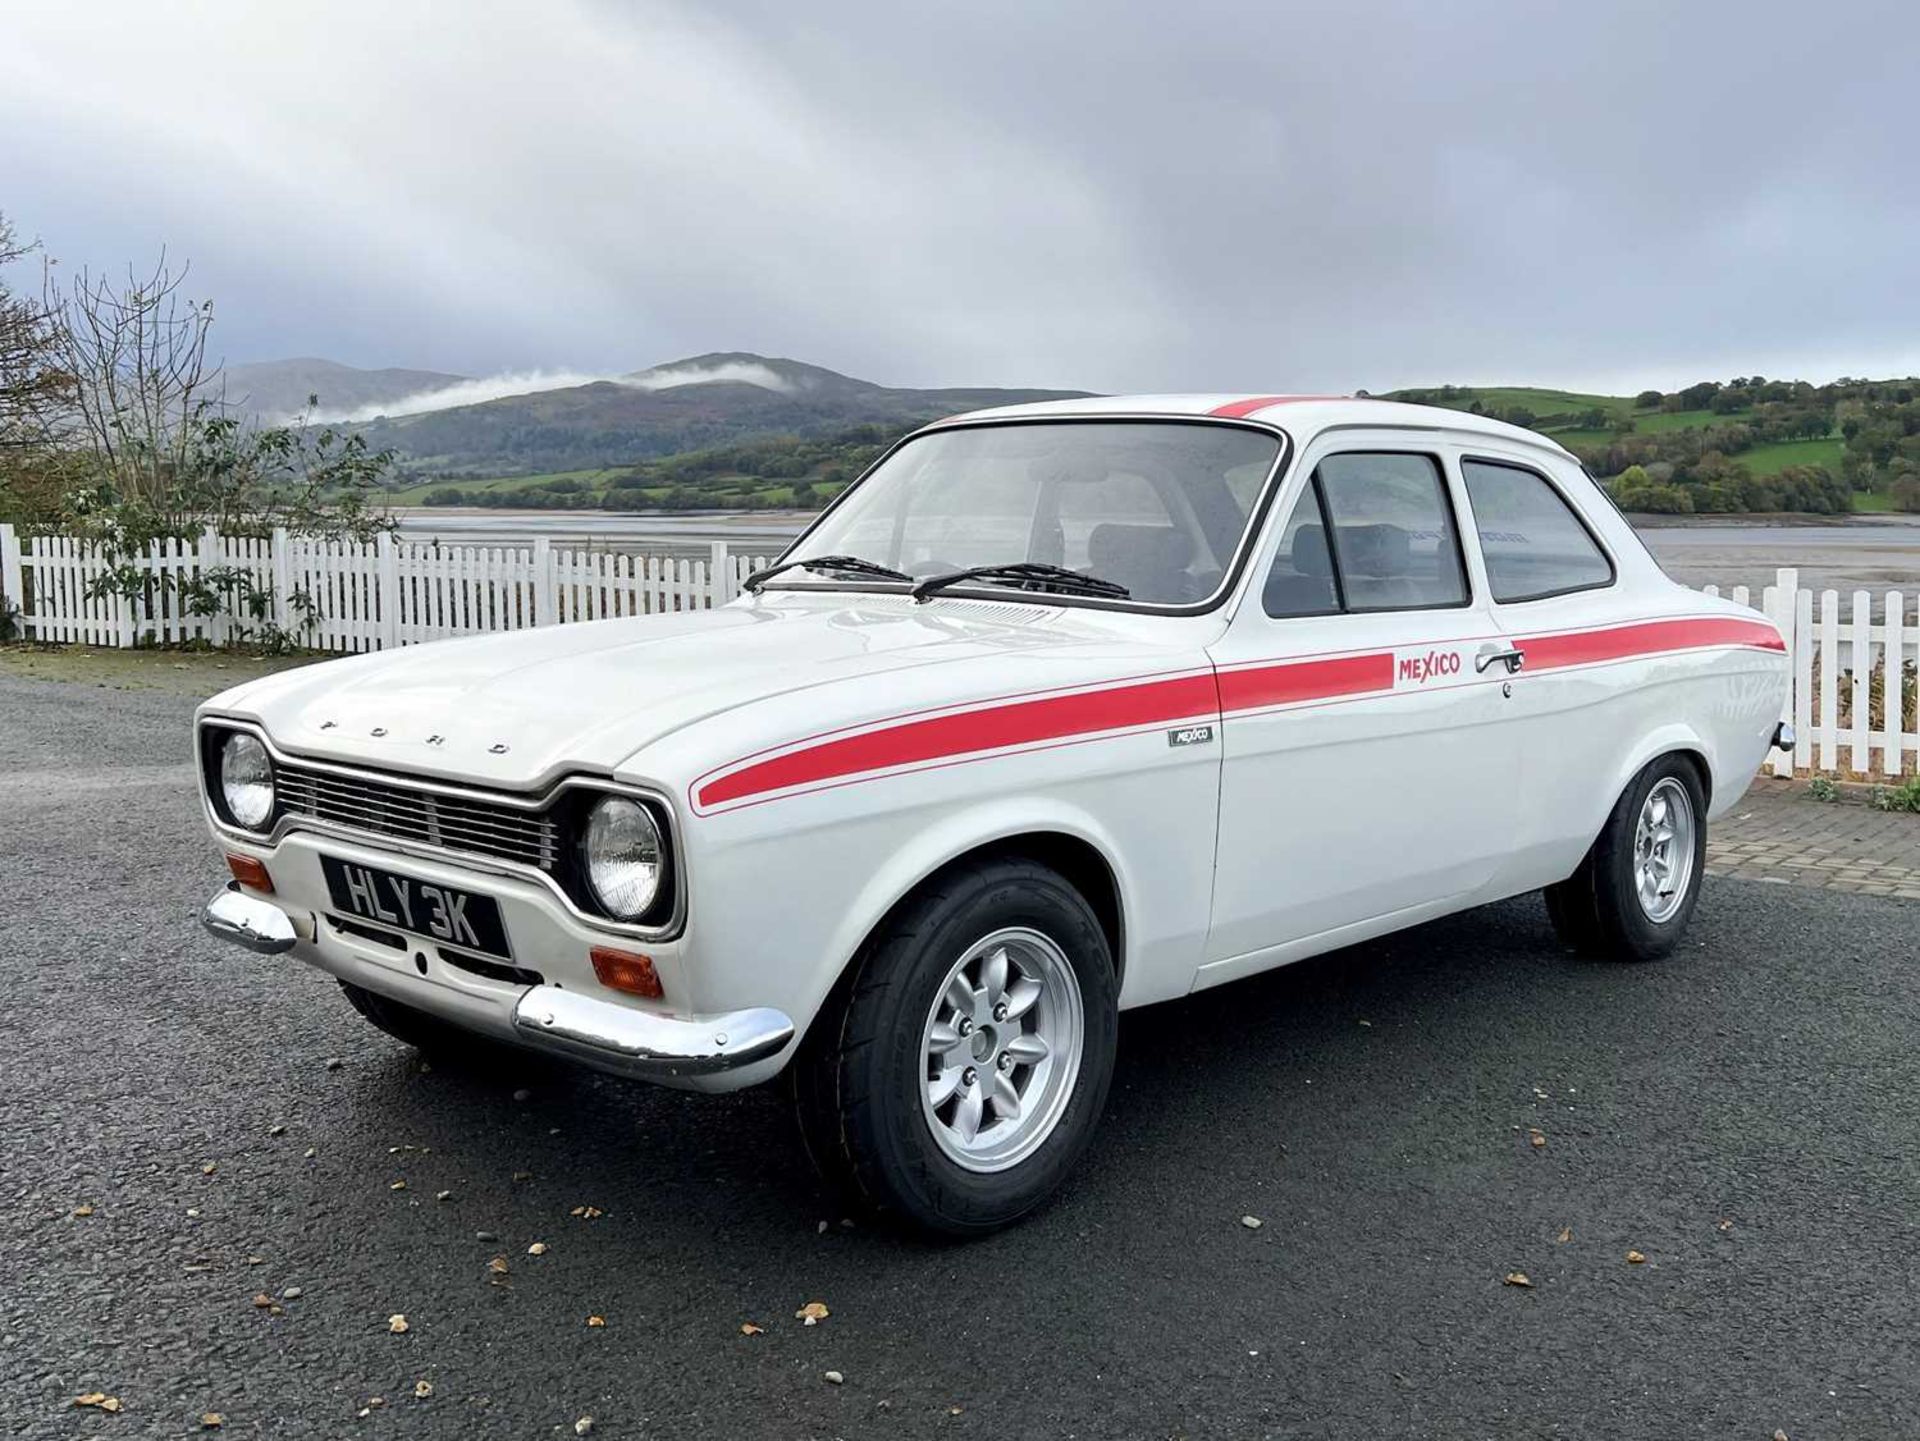 1971 Ford Escort Mexico with 2.1-litre Cosworth engine 2.1-Litre naturally aspirated Cosworth engine - Image 8 of 55